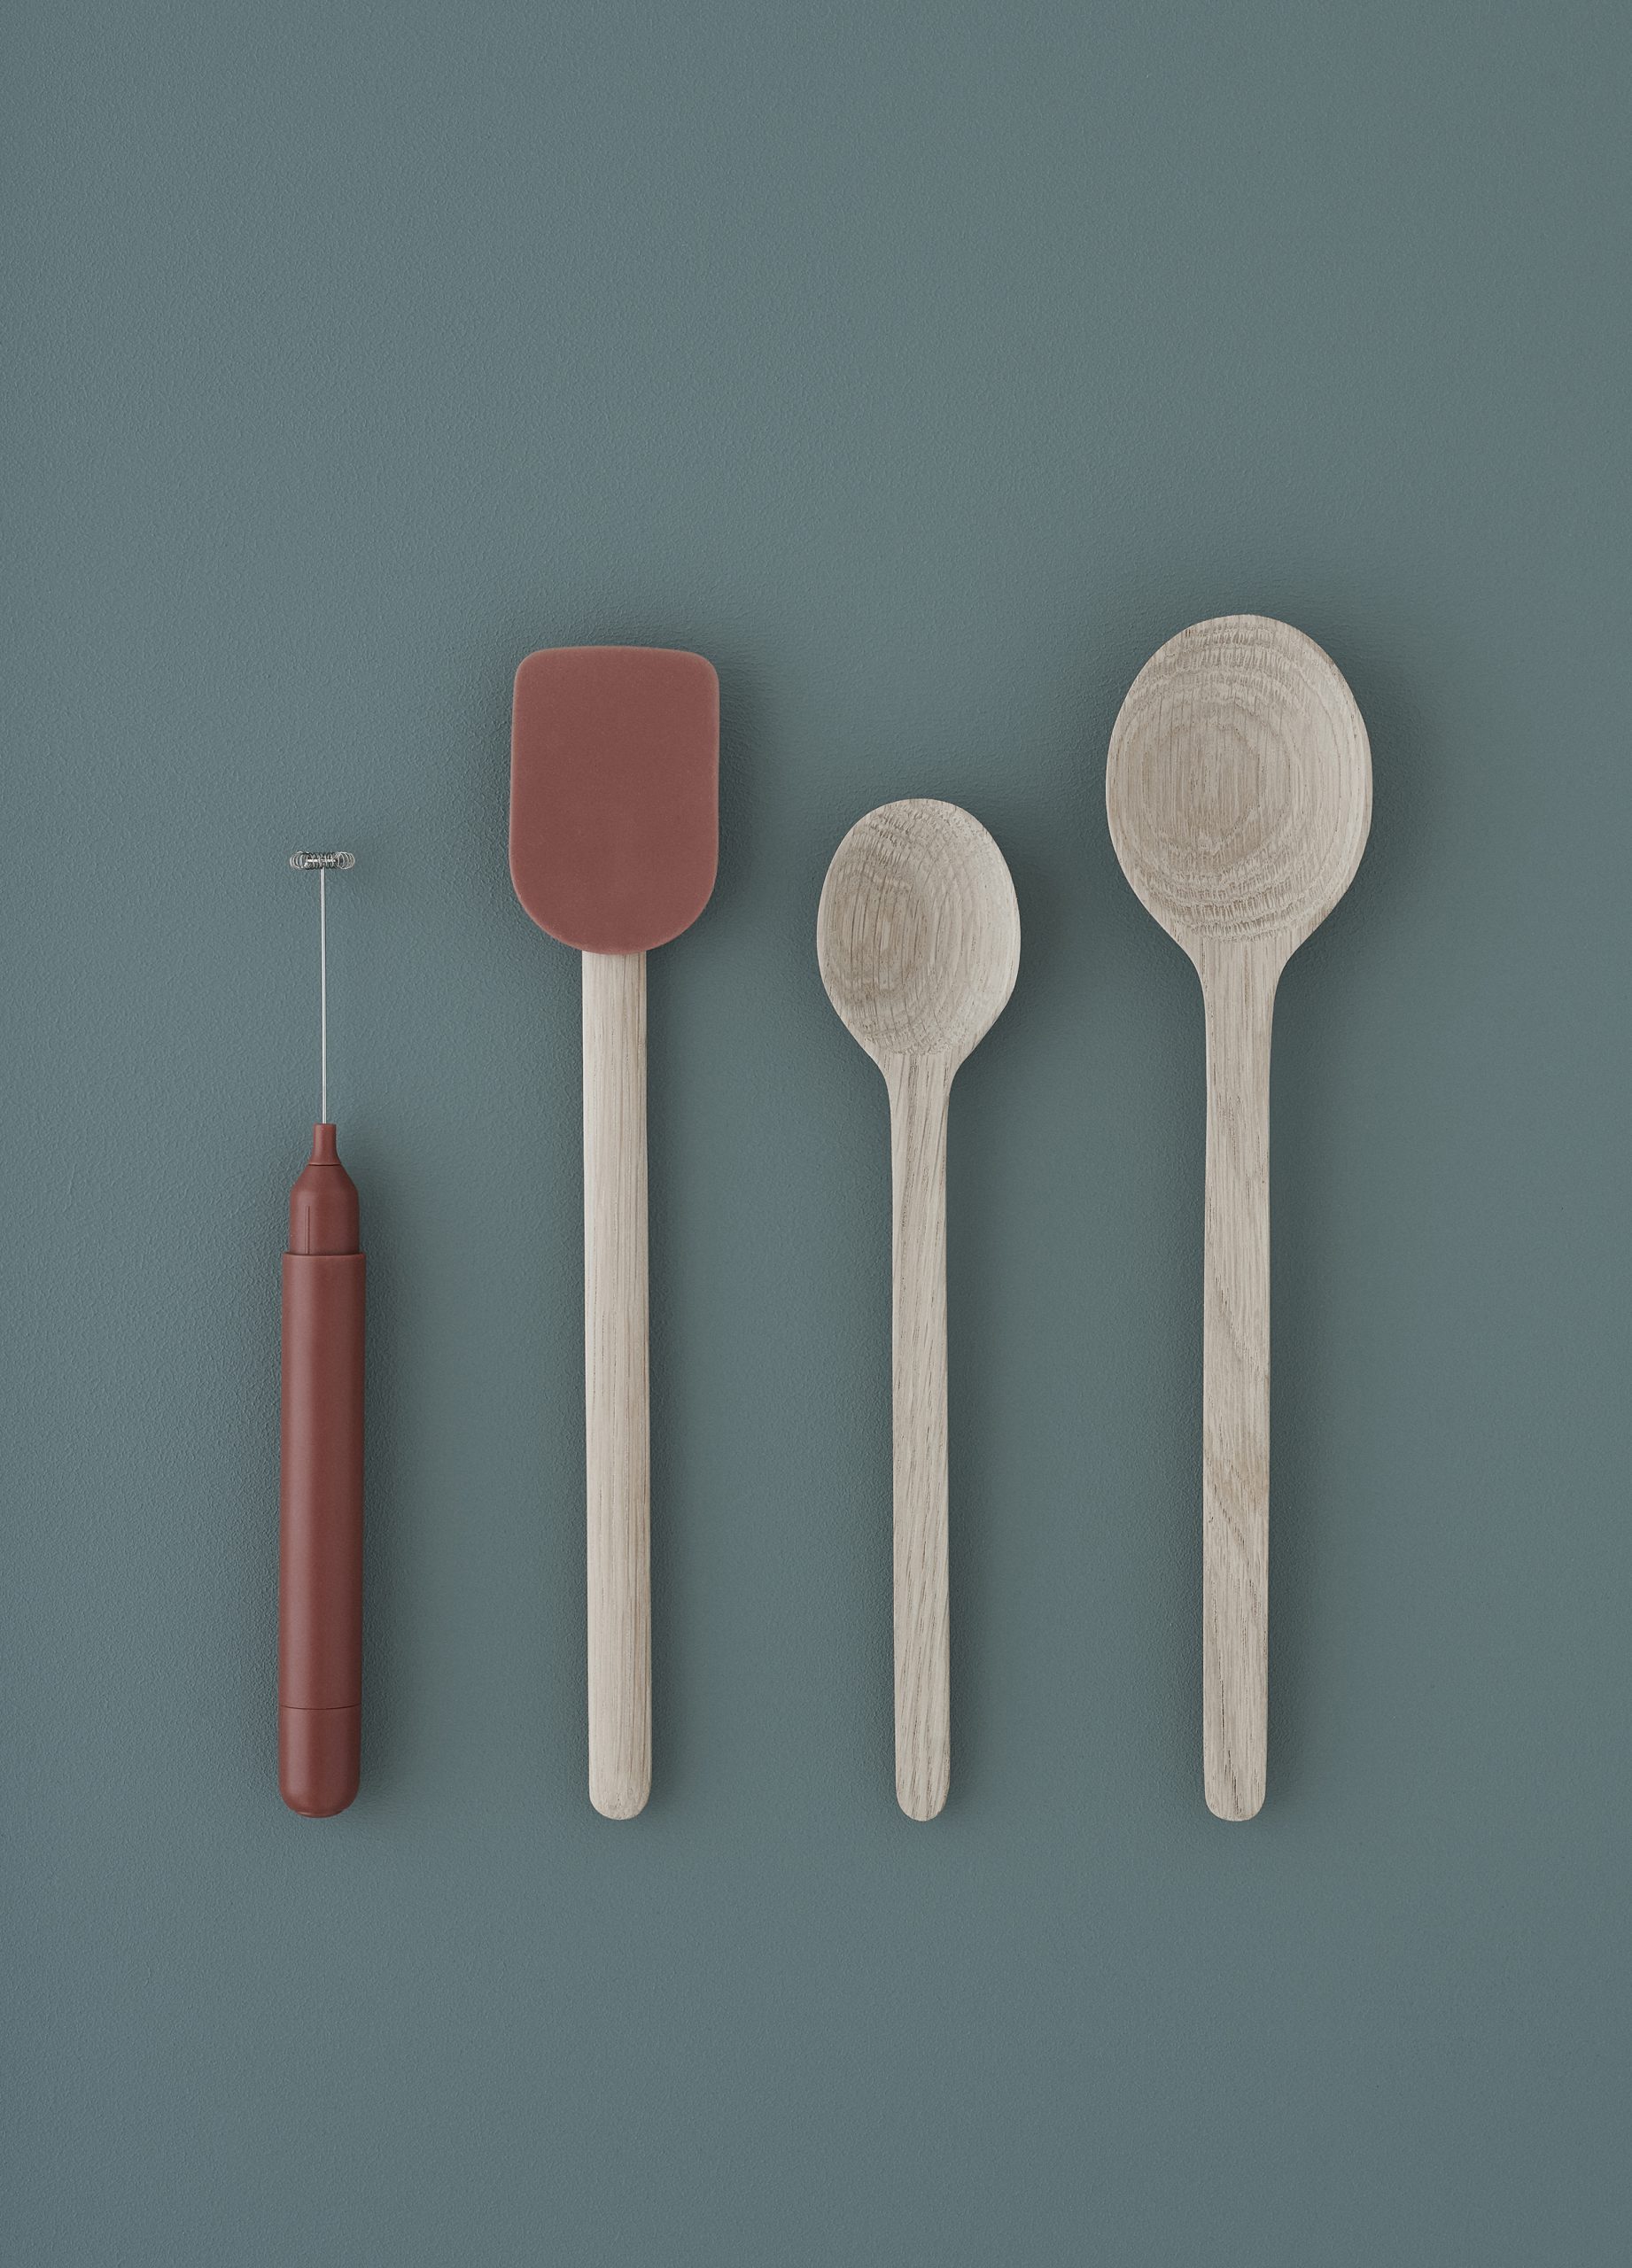 Frothy milk frother by Debiasi Sandri for RigTig